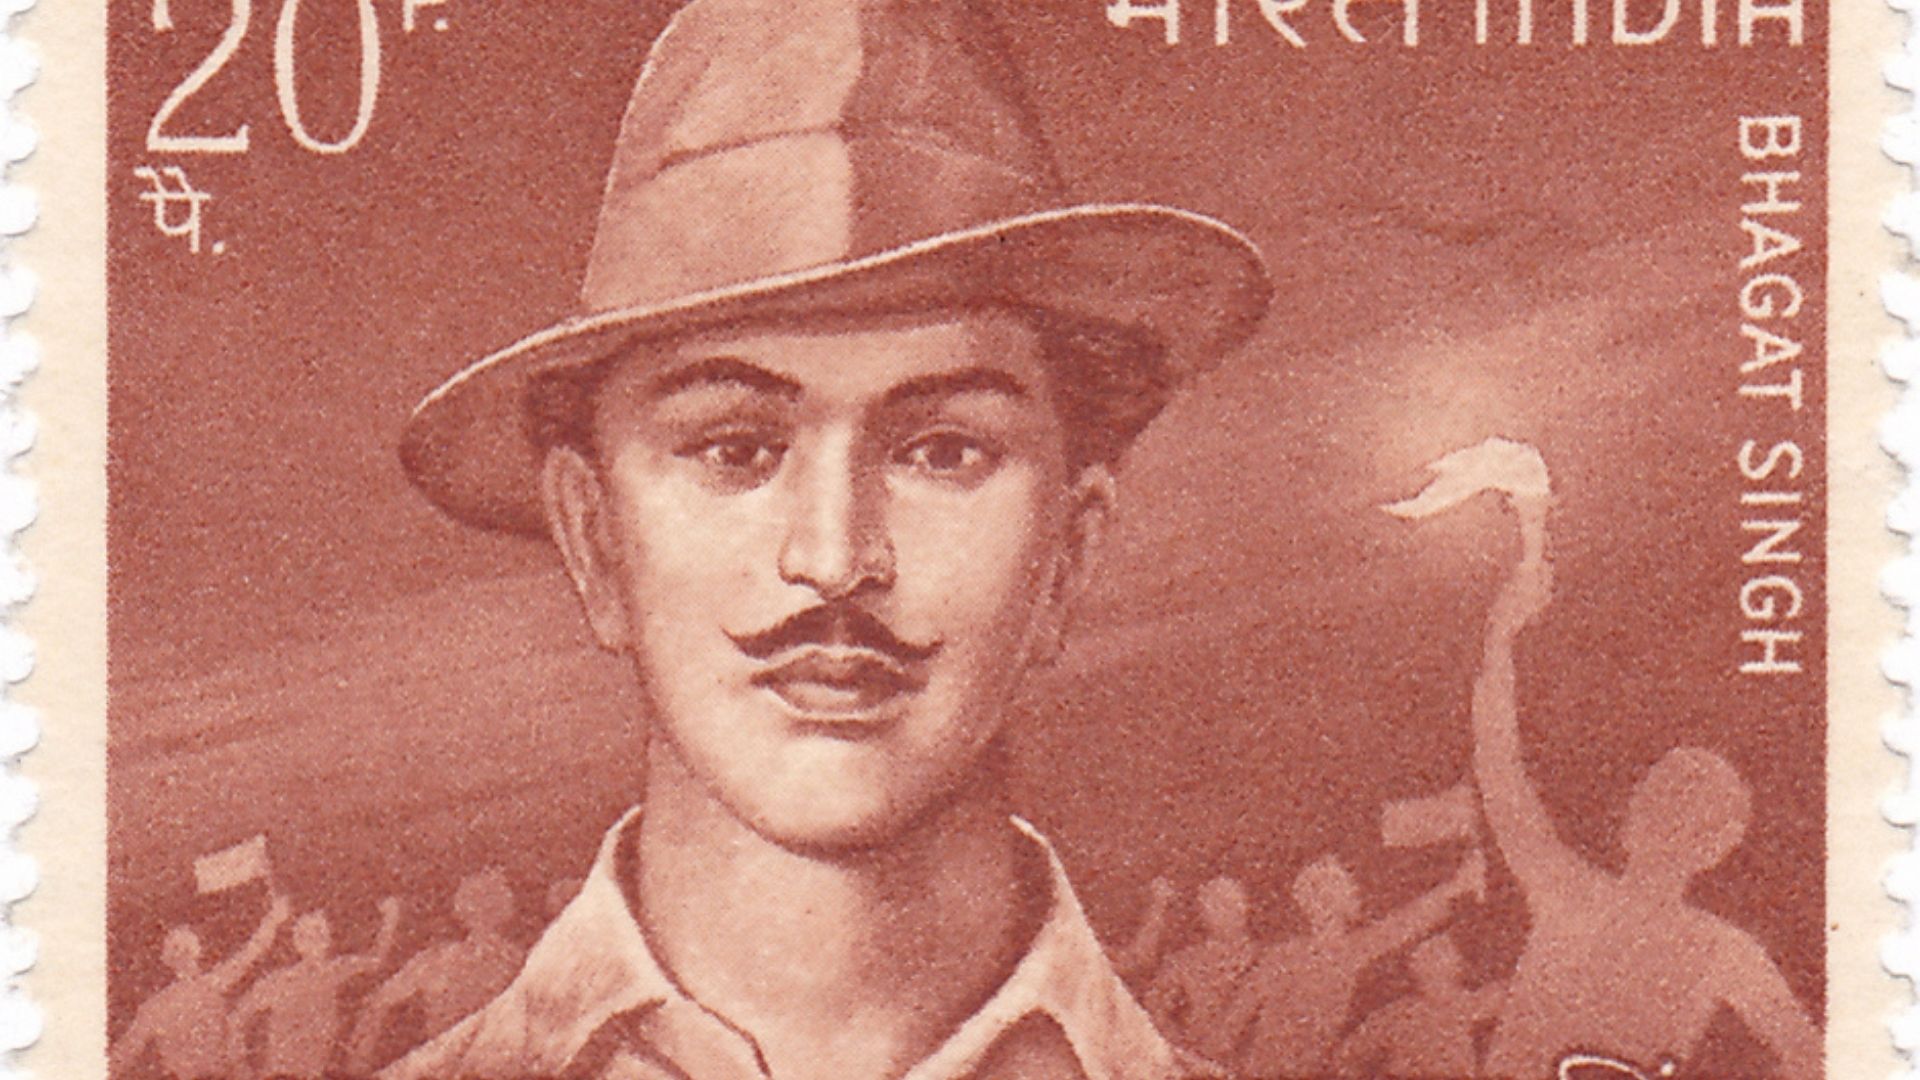 ARTICLES
Shaheed Bhagat Singh
BY  MARCH 23, 2021  3 MINS READ